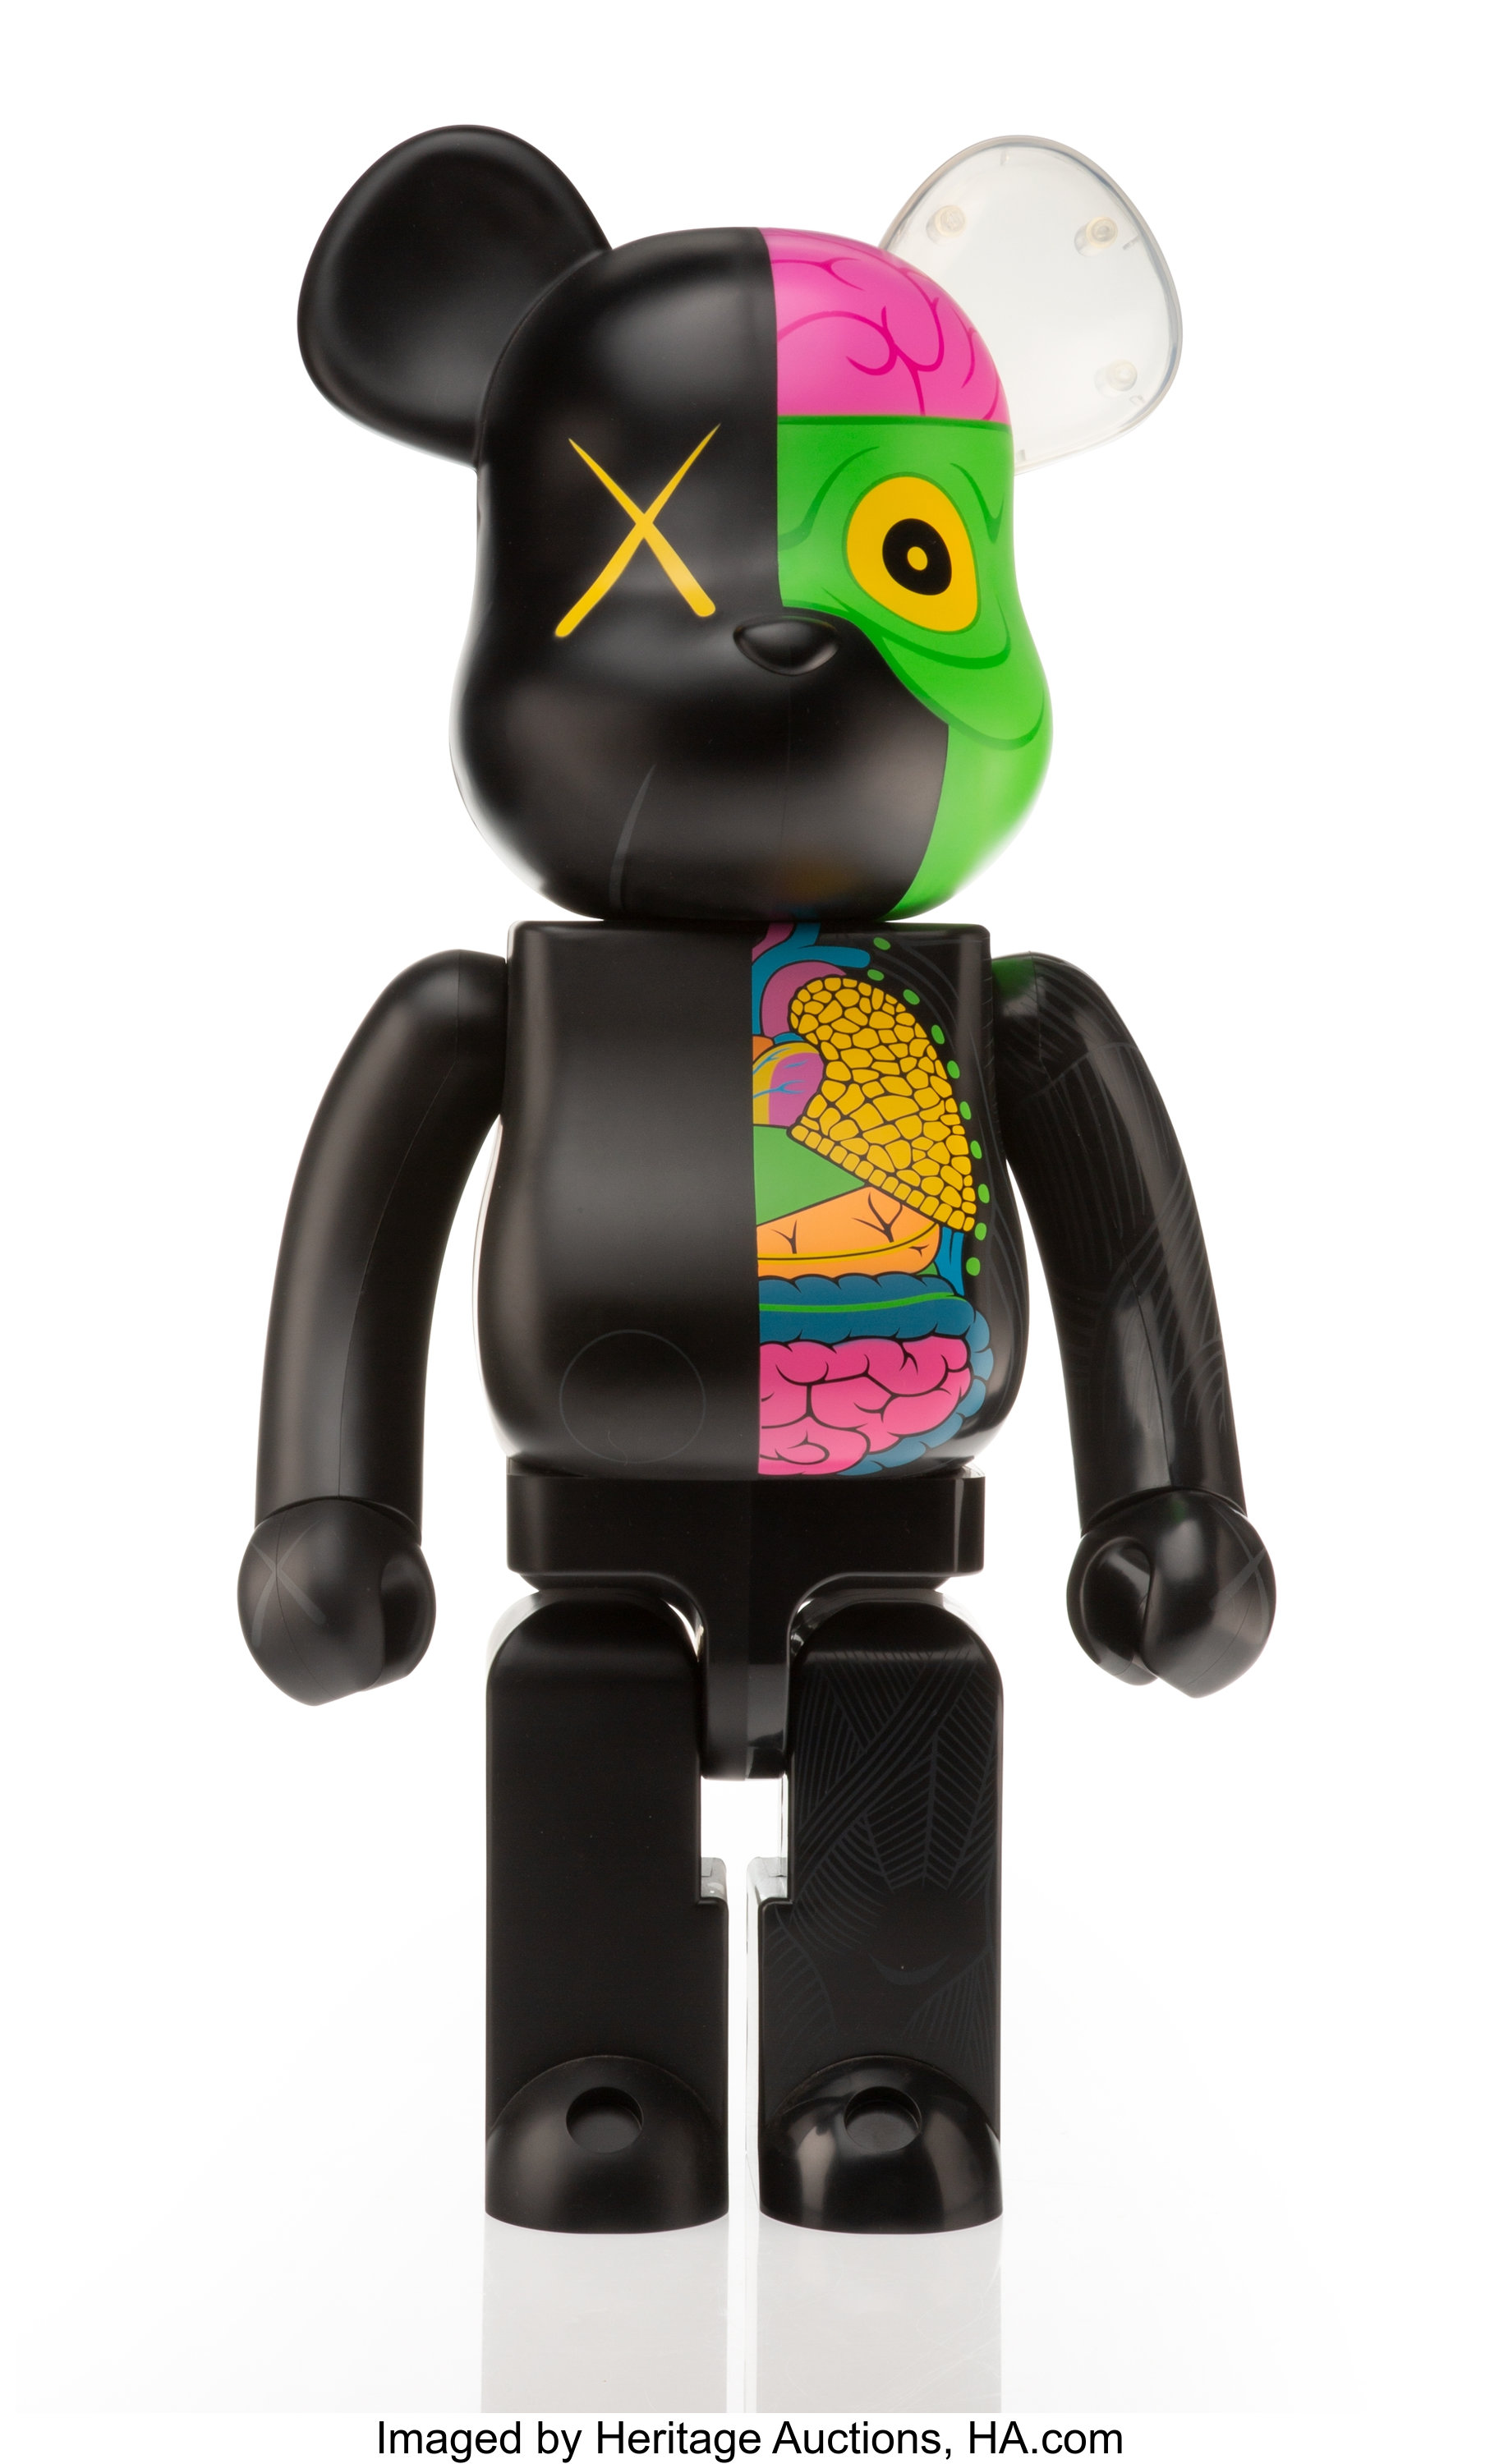 KAWS X BE@RBRICK. Dissected Companion 1000% (Black), 2010. Painted 